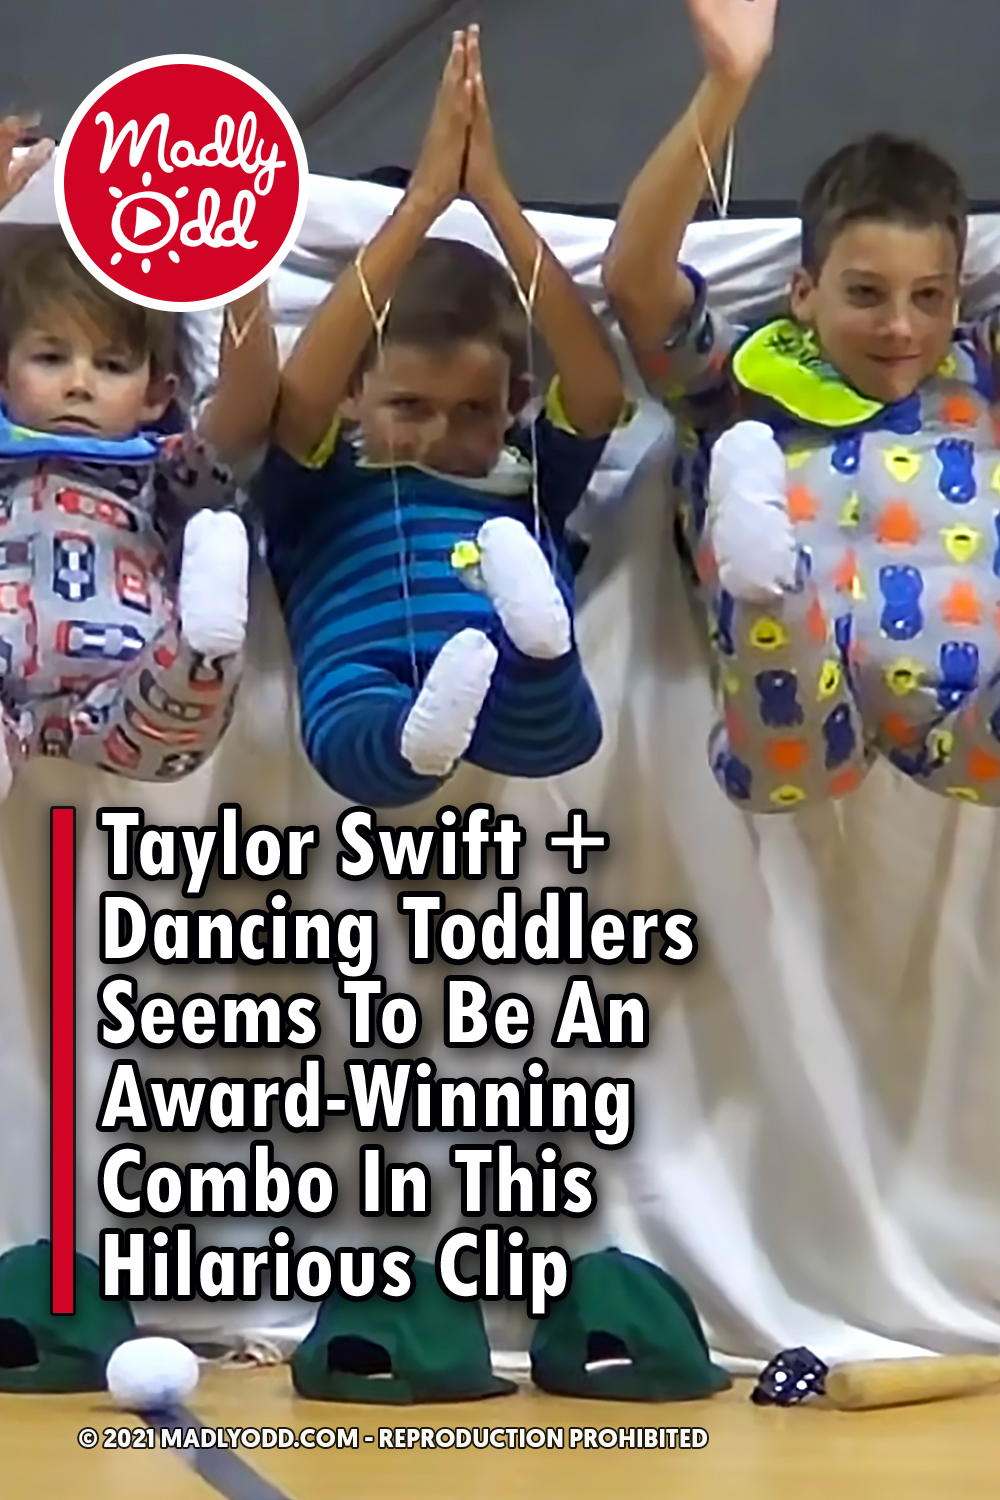 Taylor Swift + Dancing Toddlers Seems To Be An Award-Winning Combo In This Hilarious Clip